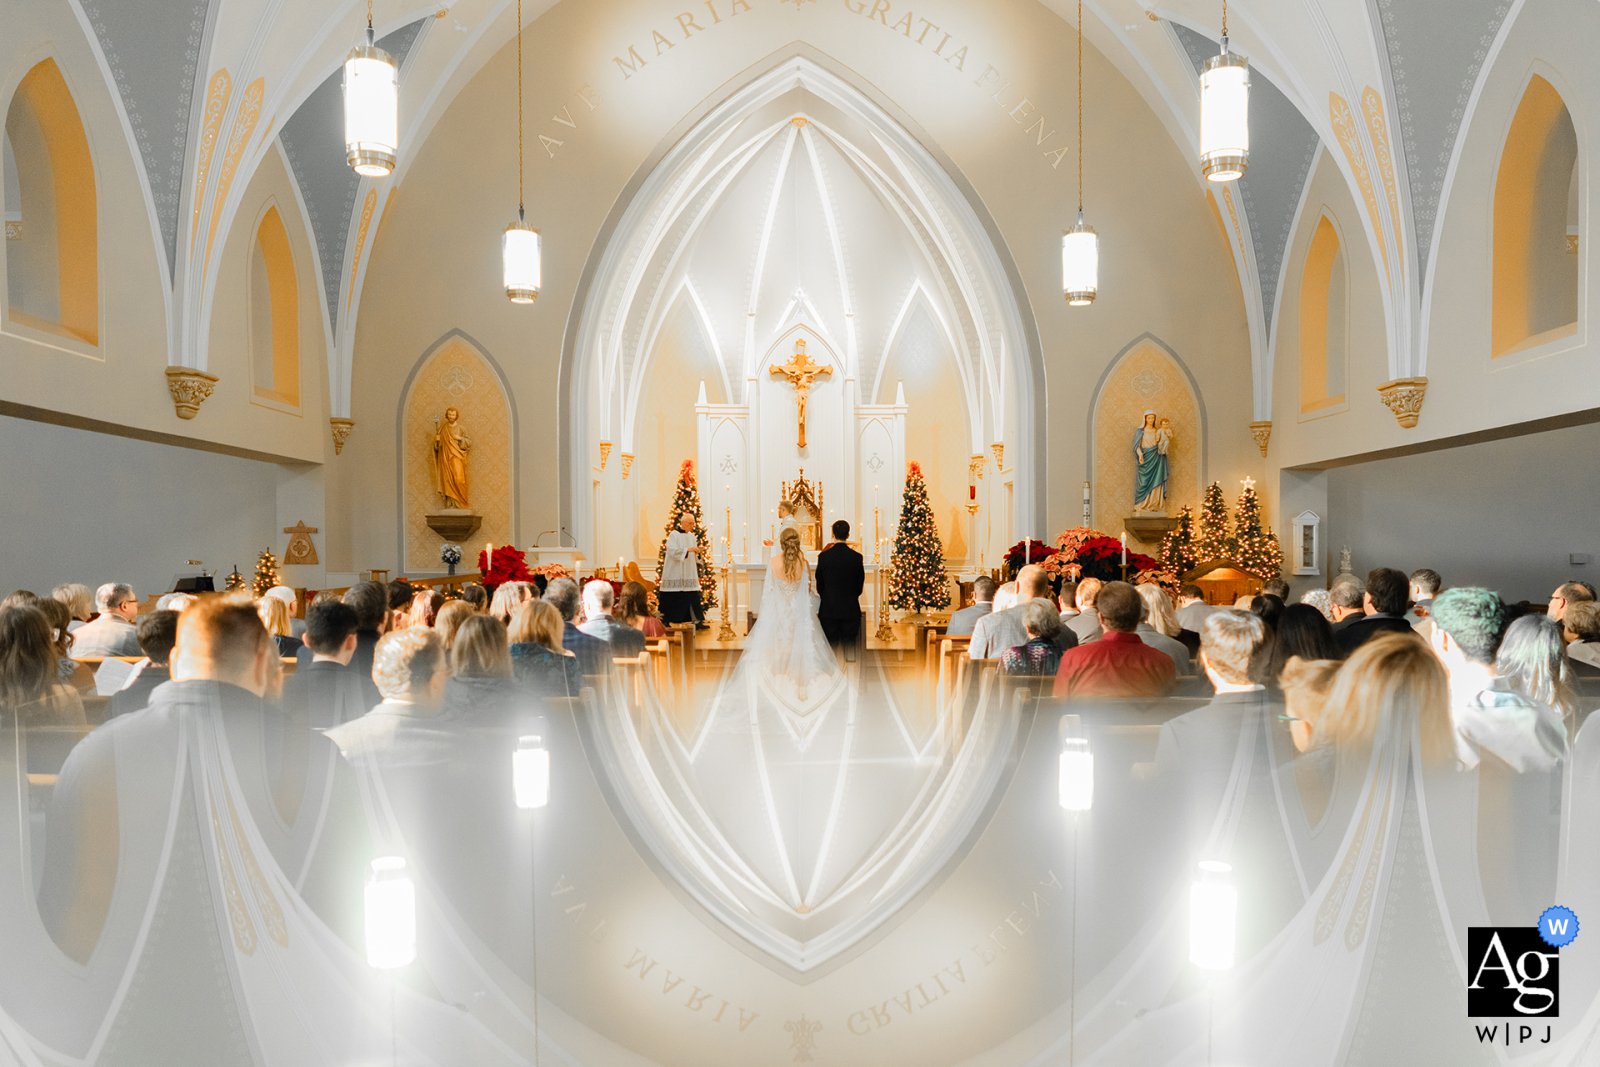 A stunning reflection during this beautiful catholic ceremony